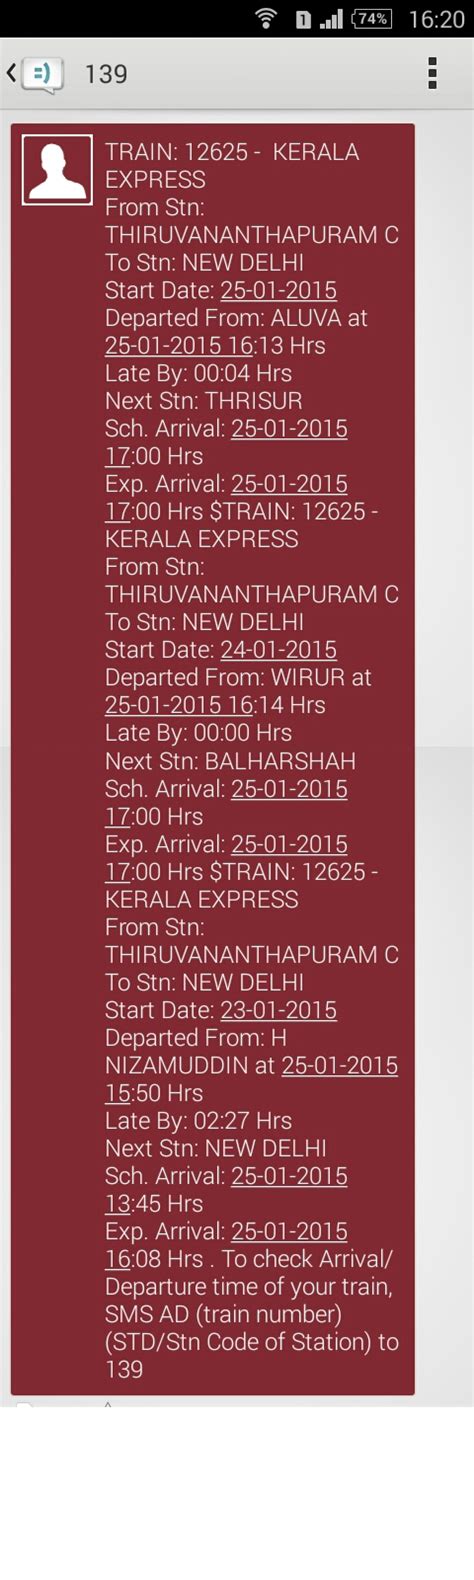 It starts from trivandrum central at 11hr 15 mins on sun,mon,tue,wed,thu,fri,sat and reaches new delhi at 61hr 45 mins covering 3031.1 km. Where is My Train? How to Find Your Train's Location - 24 ...